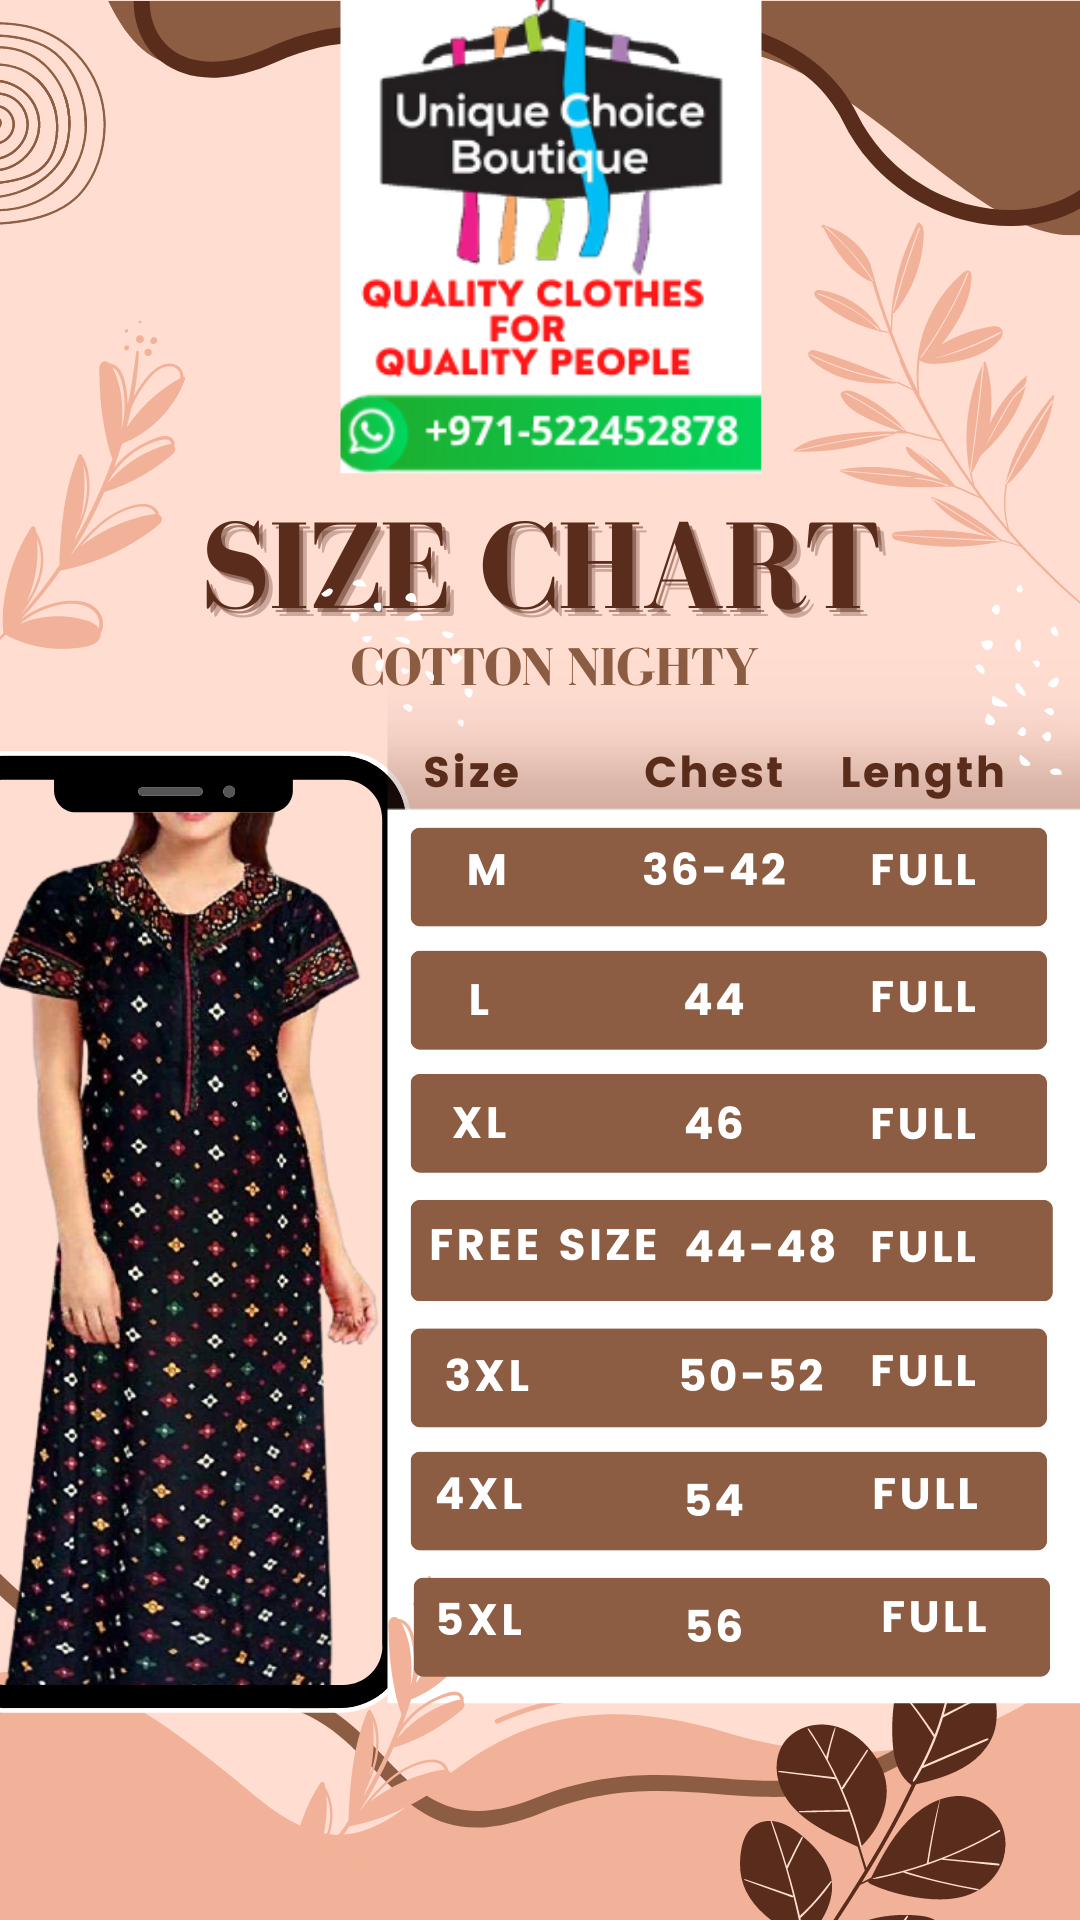 UNIQUE CHOICE Cotton Nighty, Cotton Night Gown-Grey Floral Print-L Size